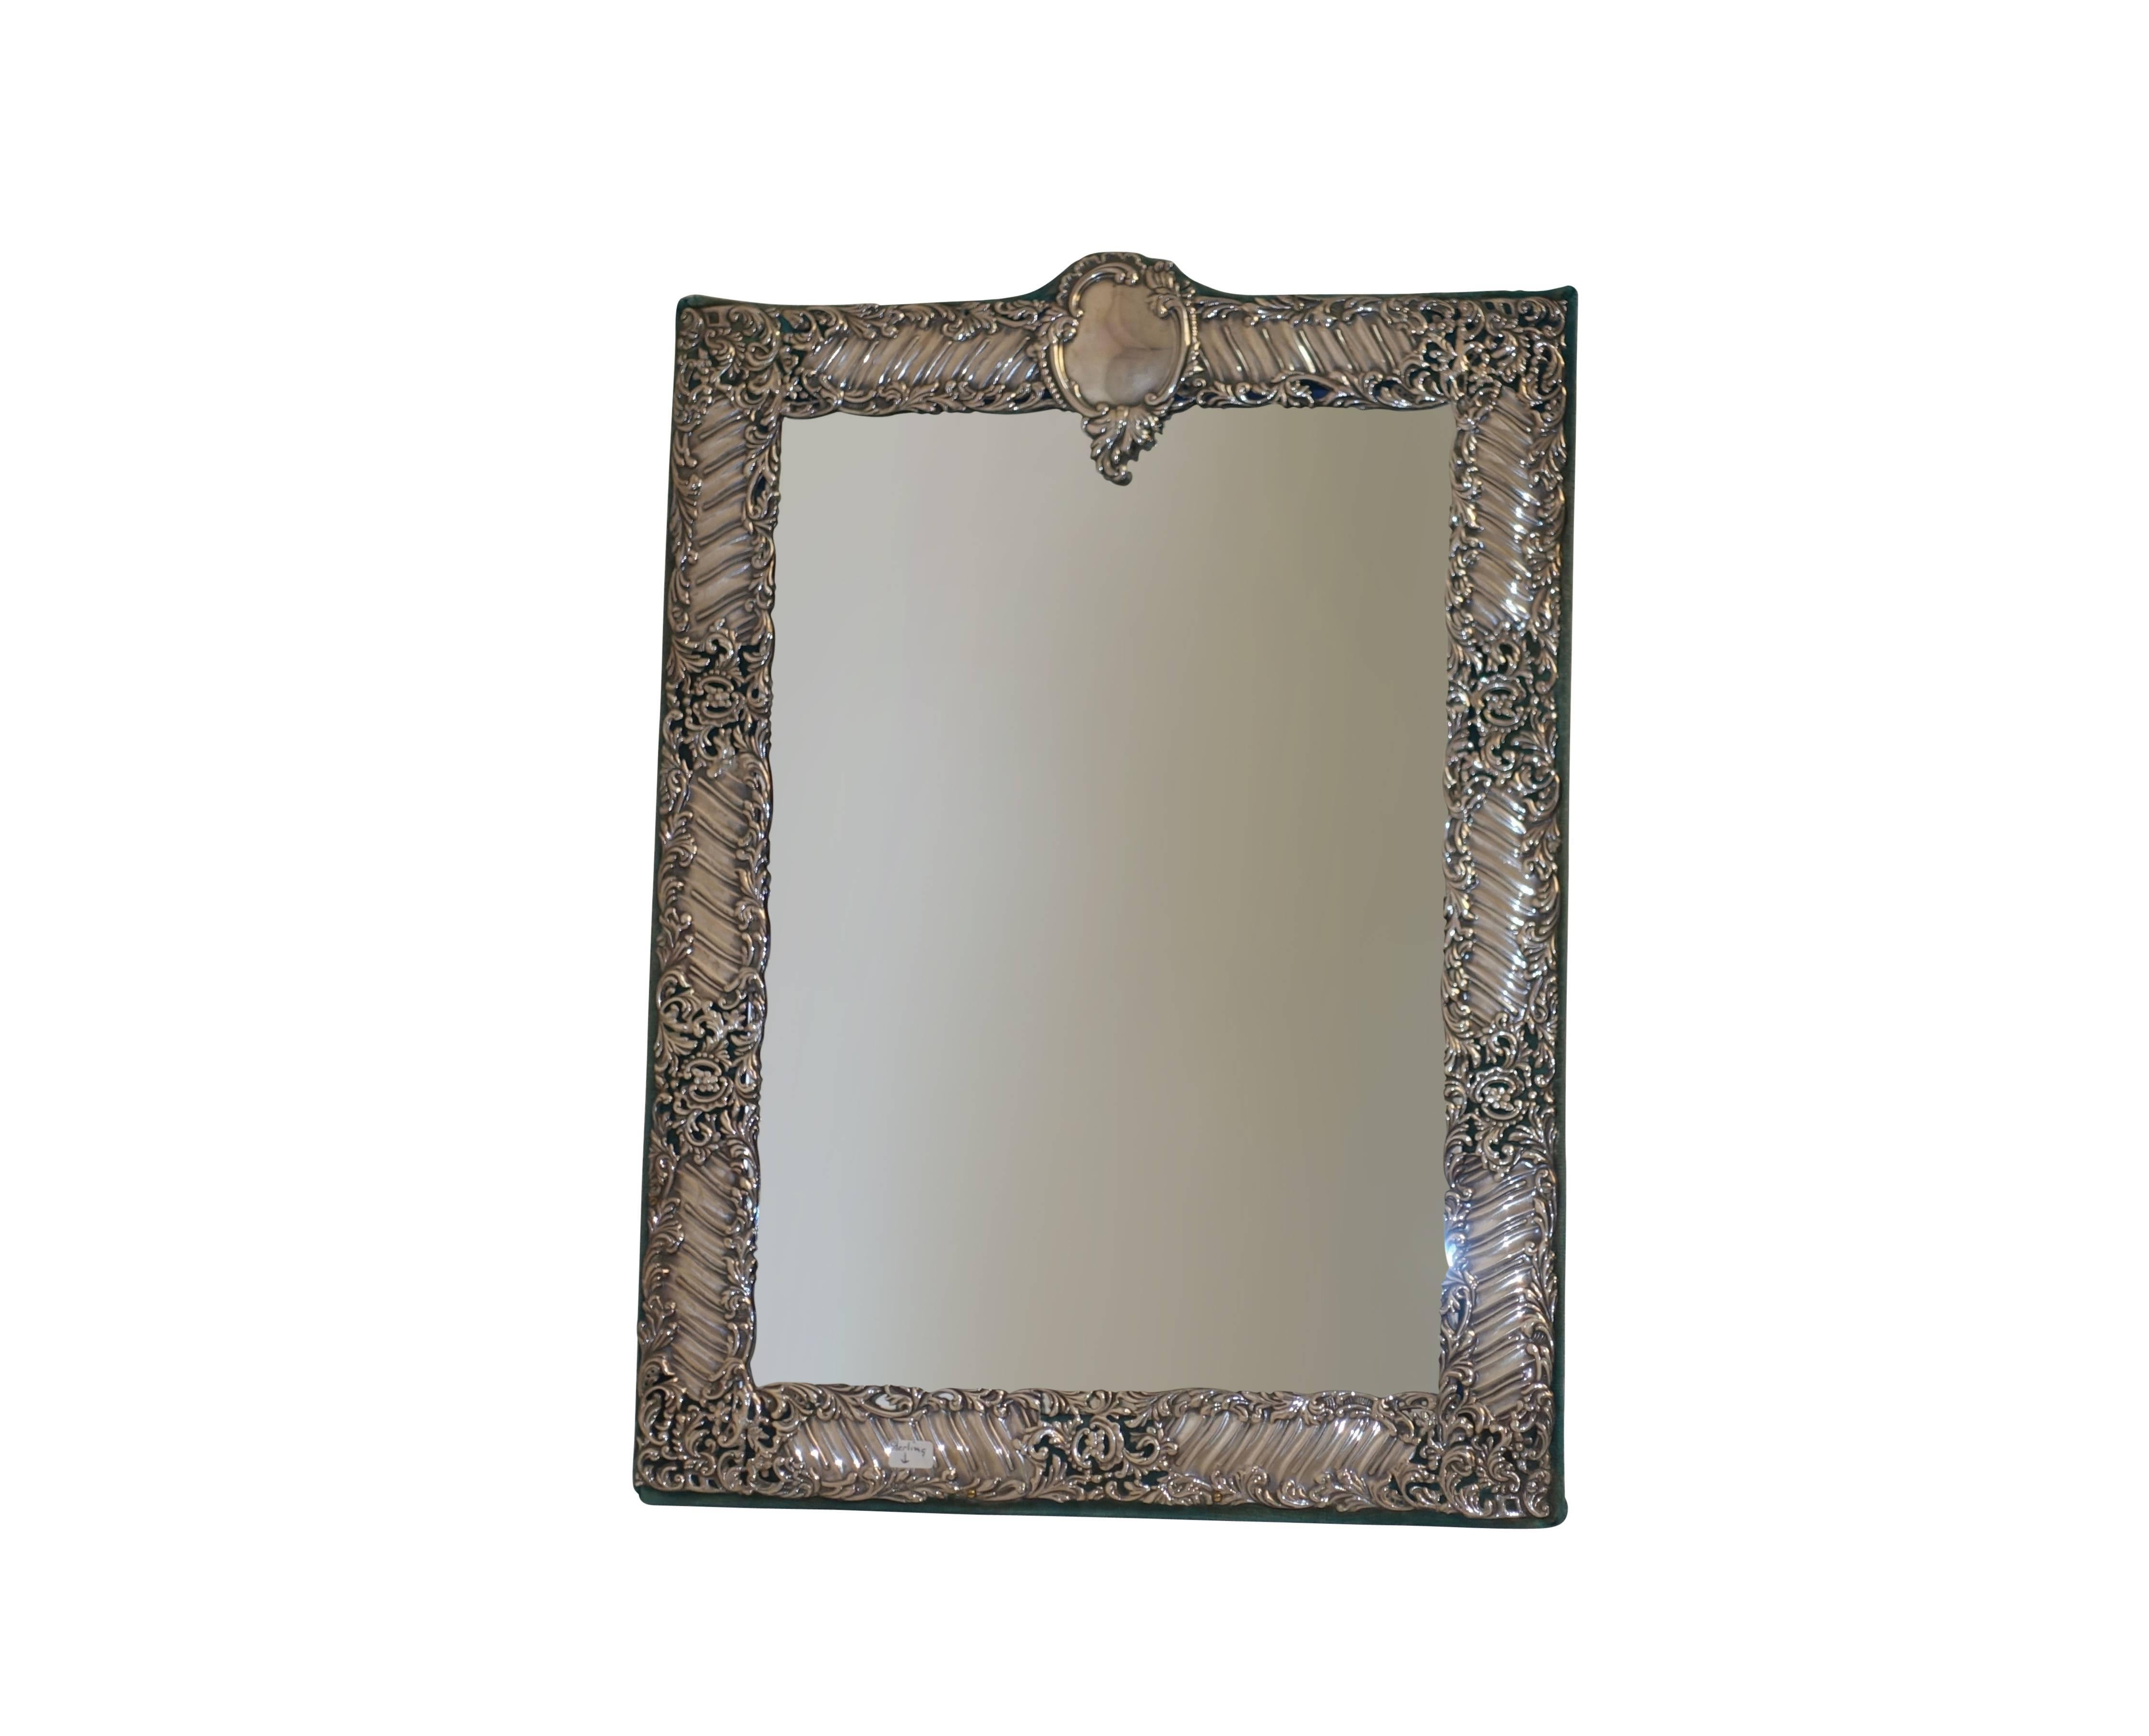 An elaborately embossed sterling silver tabletop mirror mounted on turquoise velvet backing, and having a beveled edge mirror glass. The centre cartouche is un-monogrammed. English hallmarked silver. The inner sight on the frame measures 13.5 inches